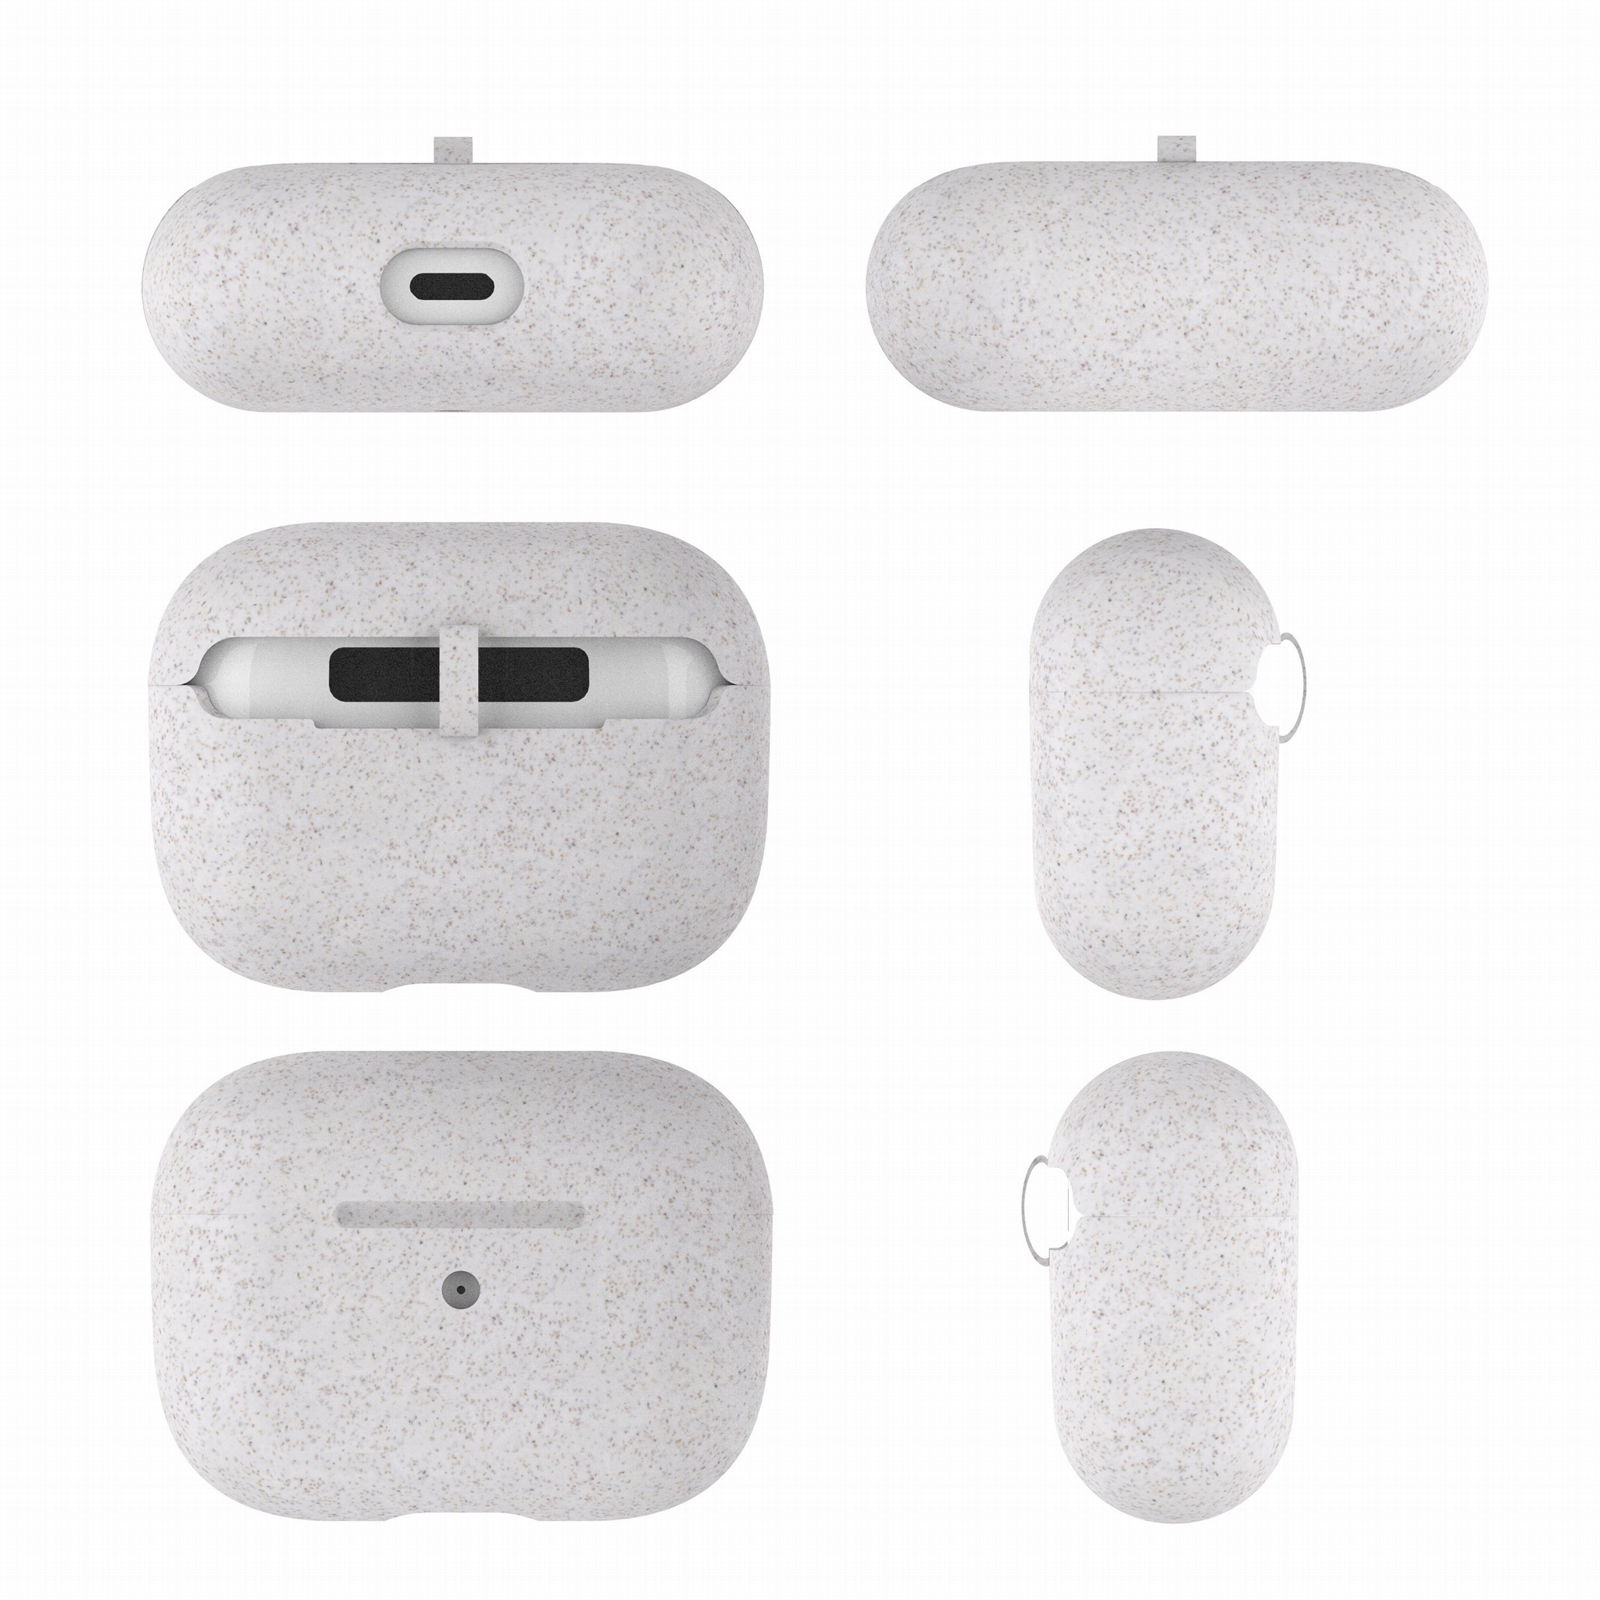 plant-based case for Airpod 2